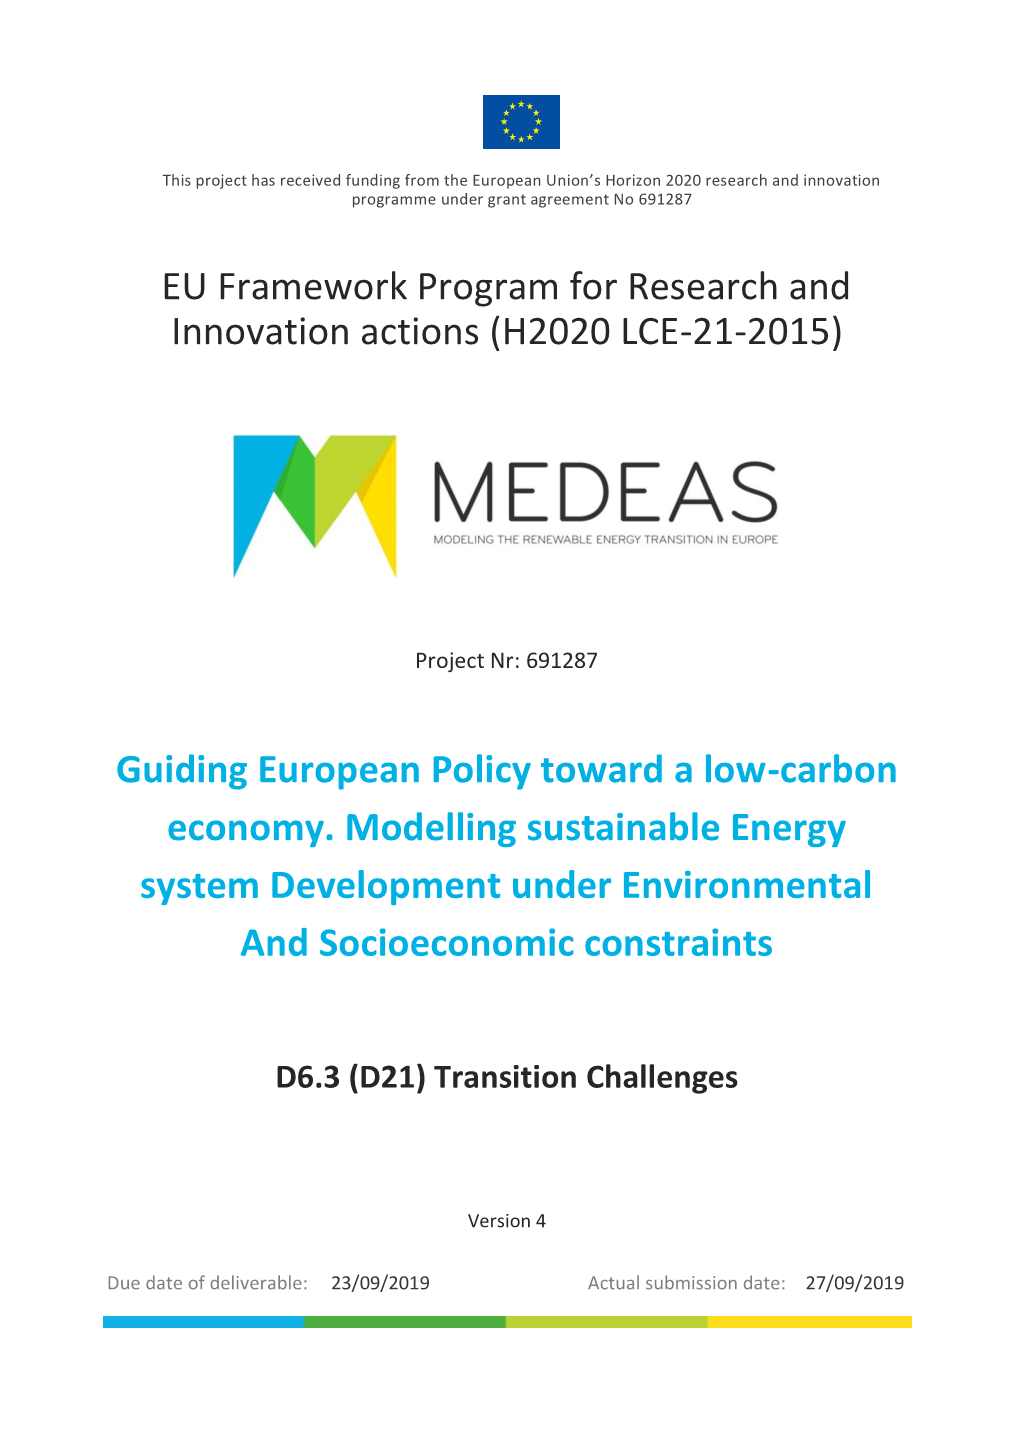 EU Framework Program for Research and Innovation Actions (H2020 LCE-21-2015)